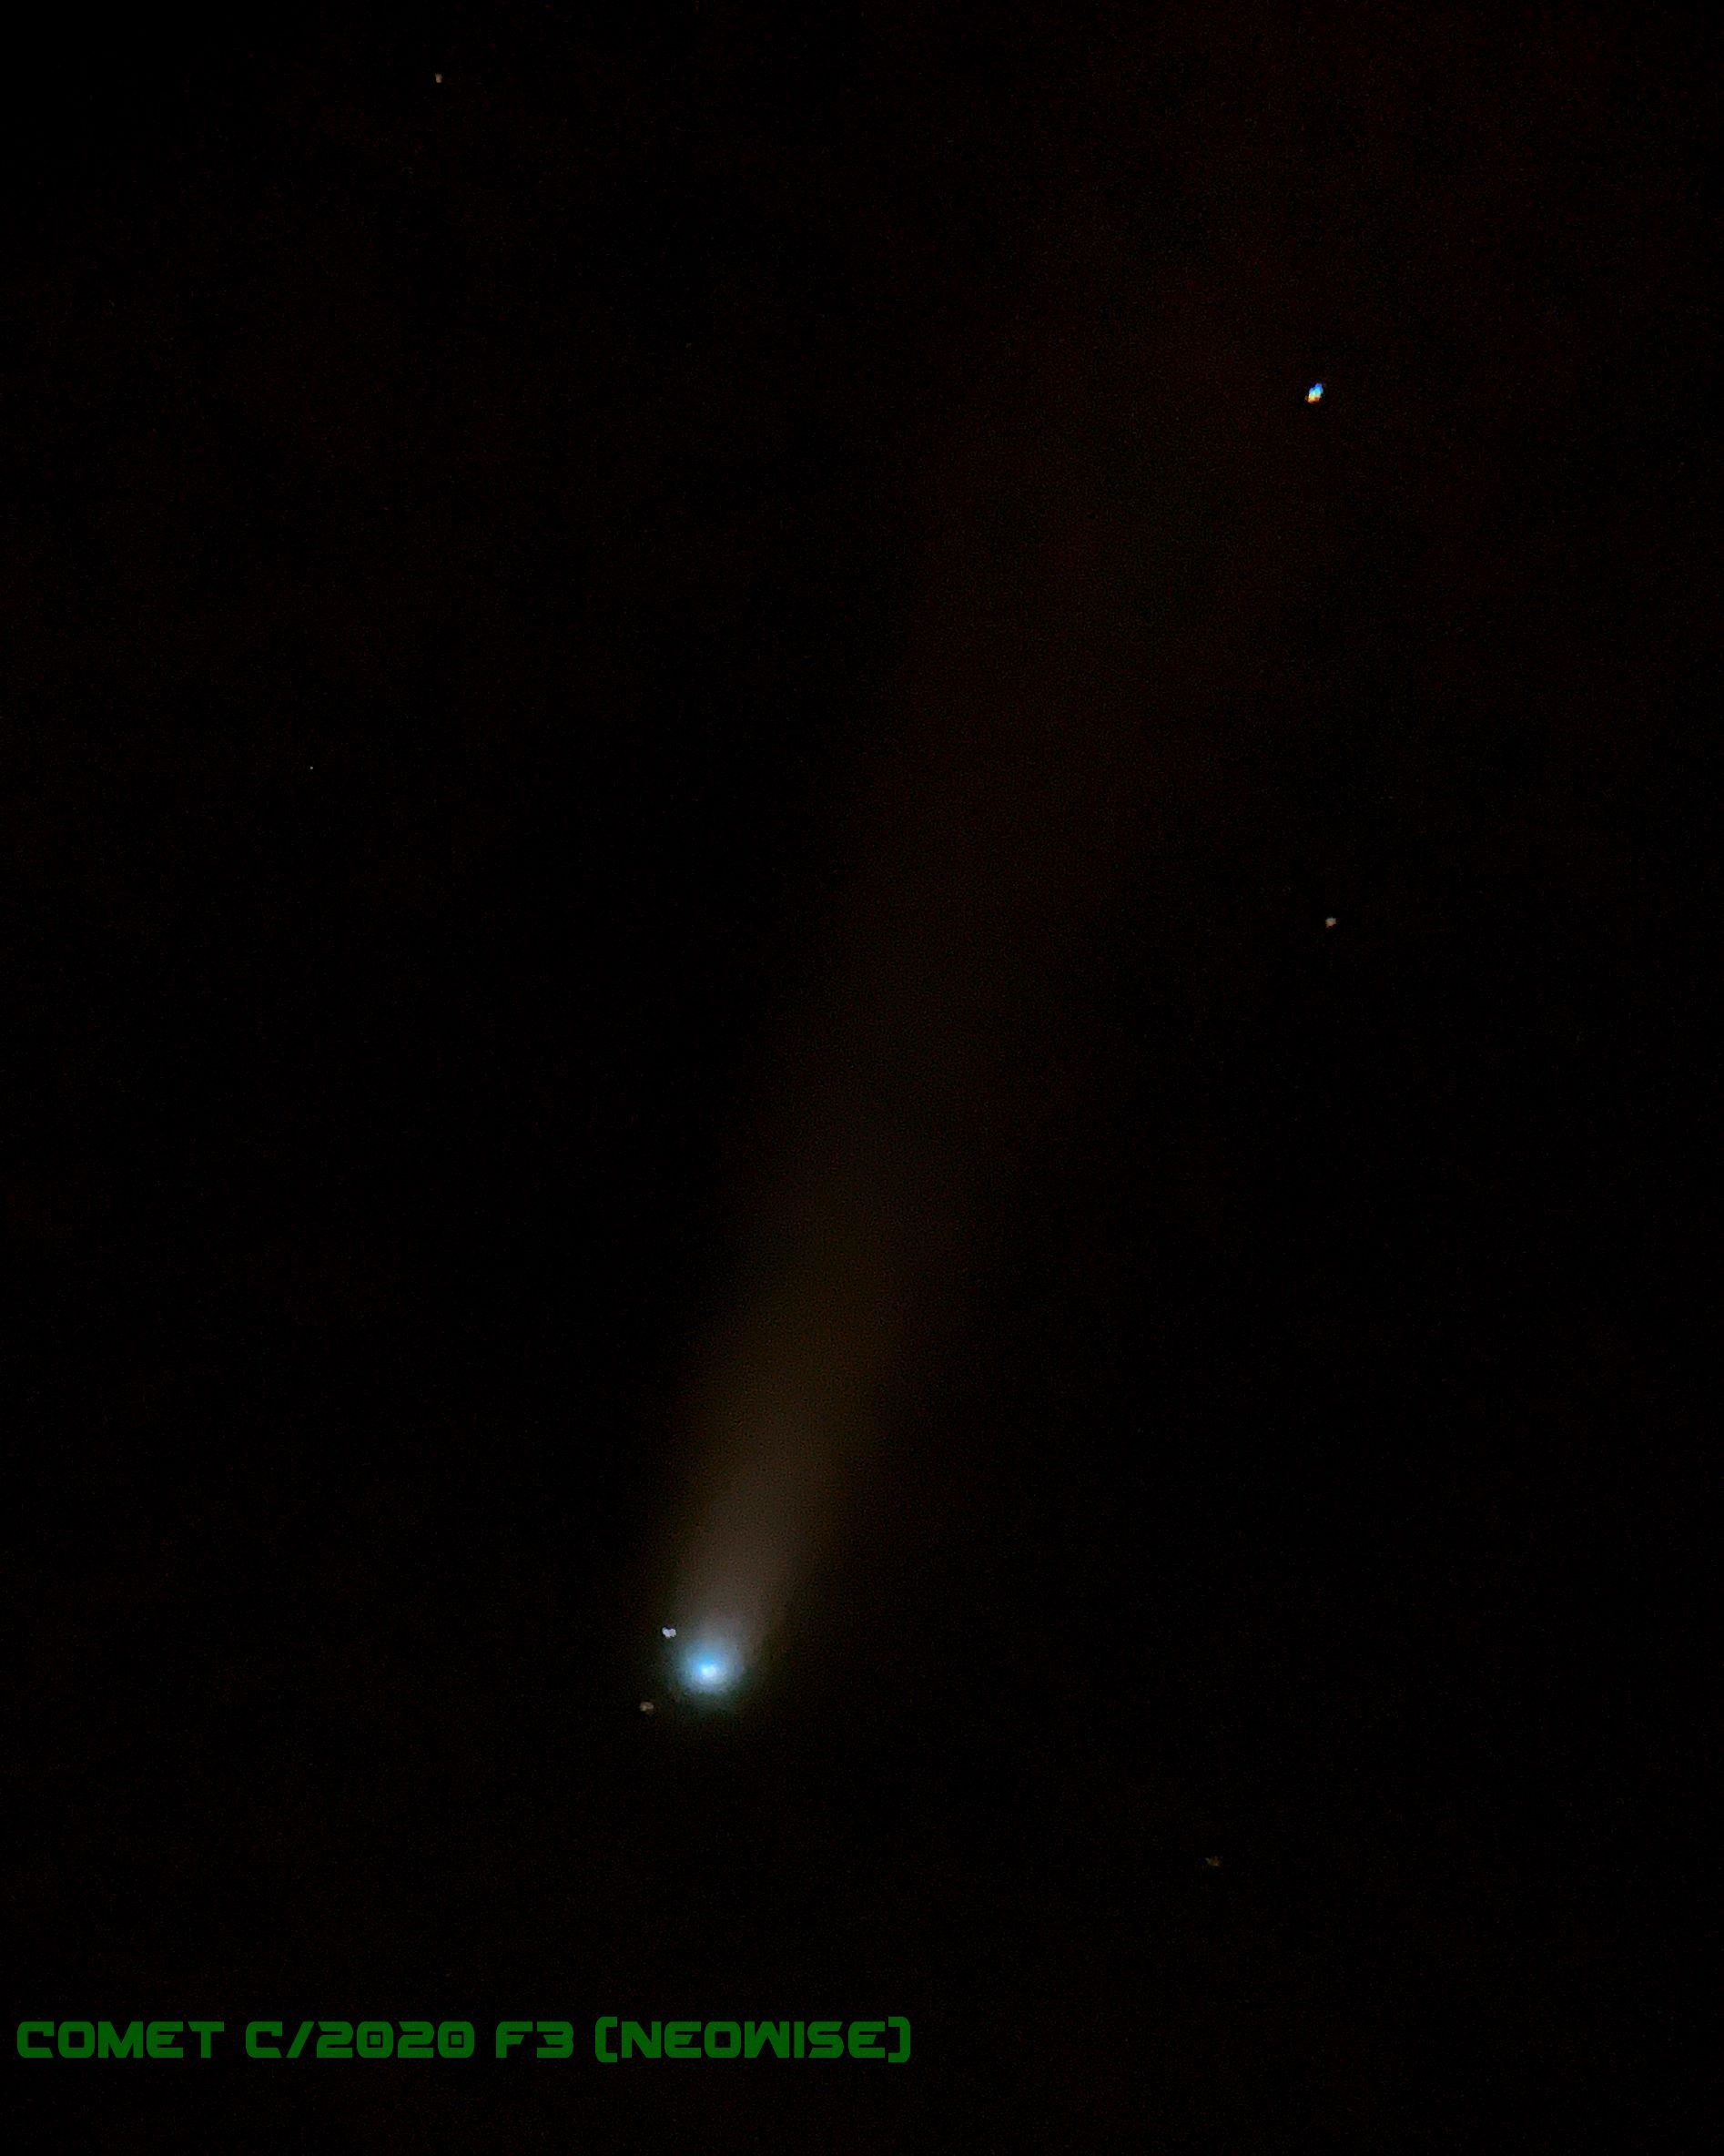 Third Night of Neowise: The Comet Made for a Dob